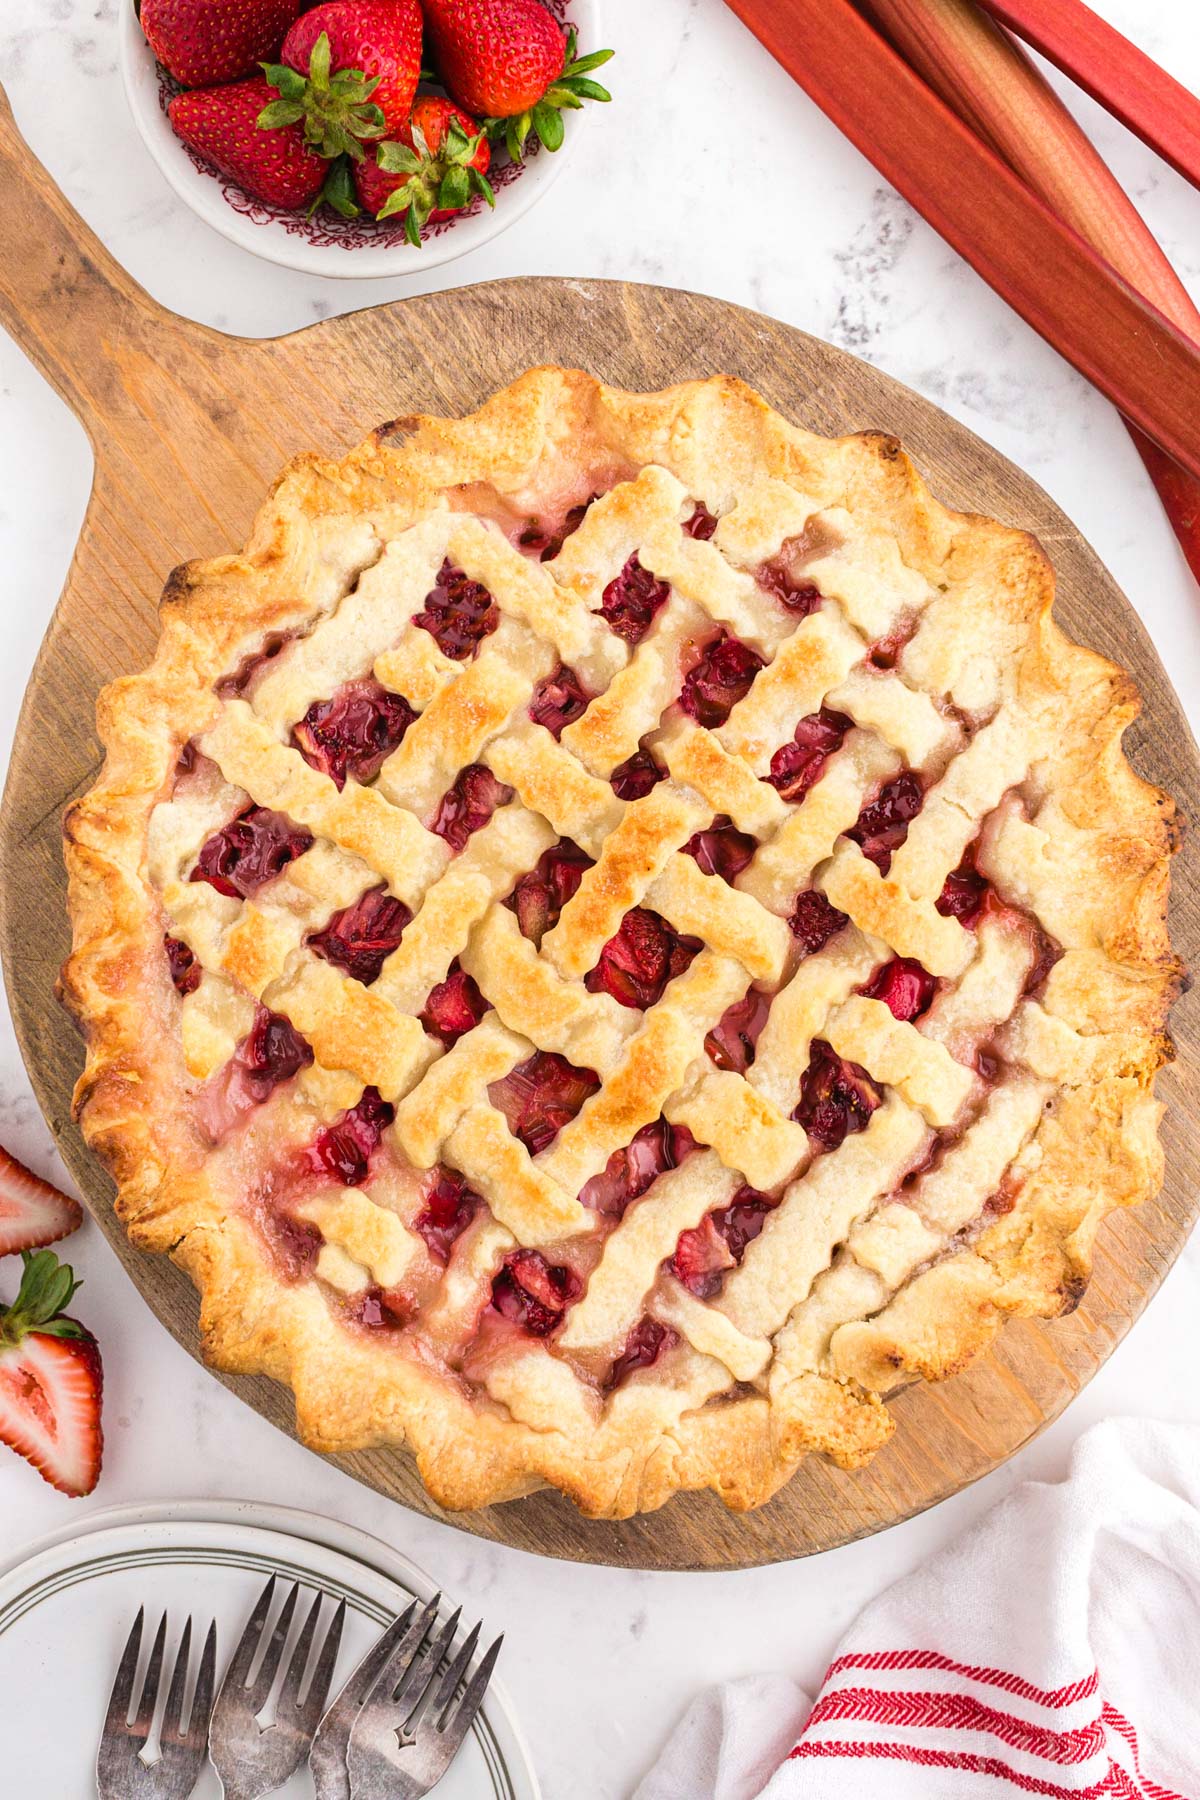 Baked strawberry rhubarb pie with lattice crust on a wooden board.